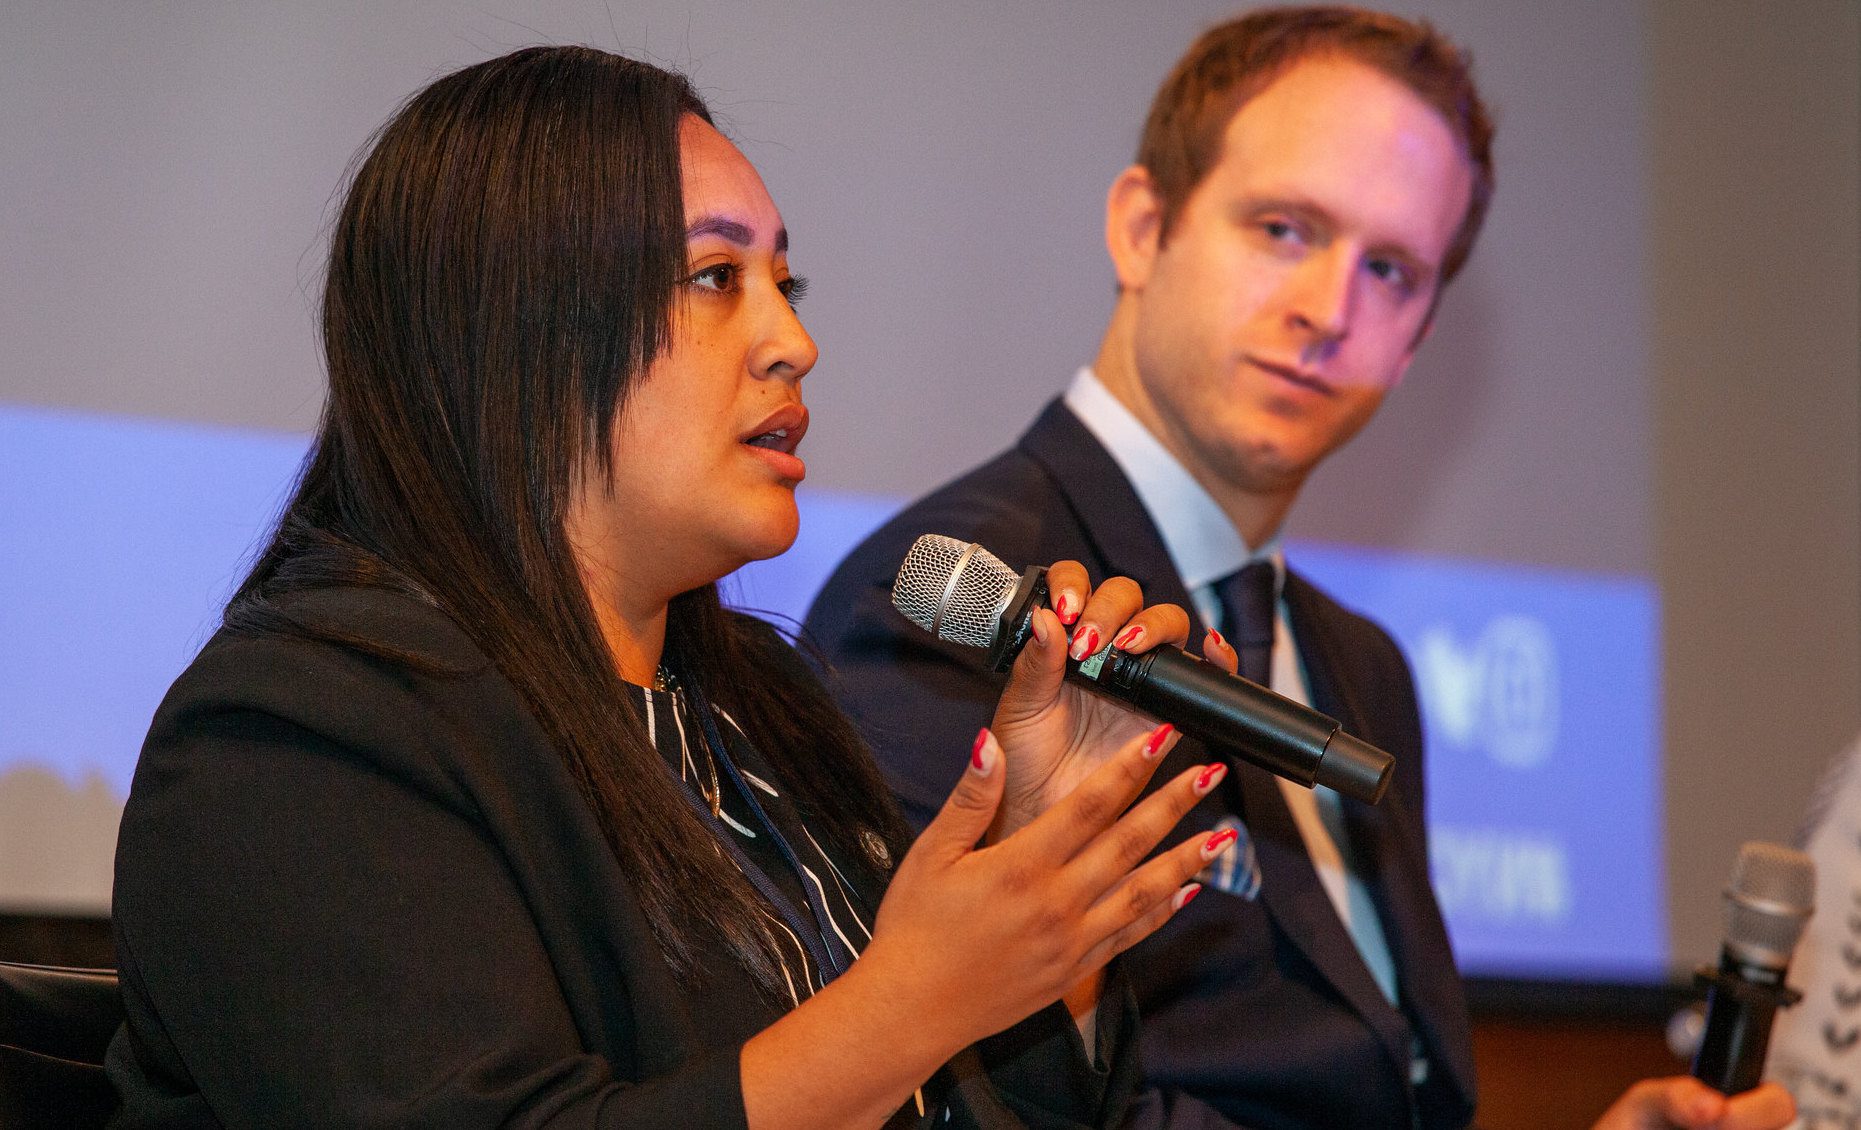 Amanda Farías, NYC Council in conversation with Brian Pascus, Crain’s NY Business at the NYCETC 2022 Conference.